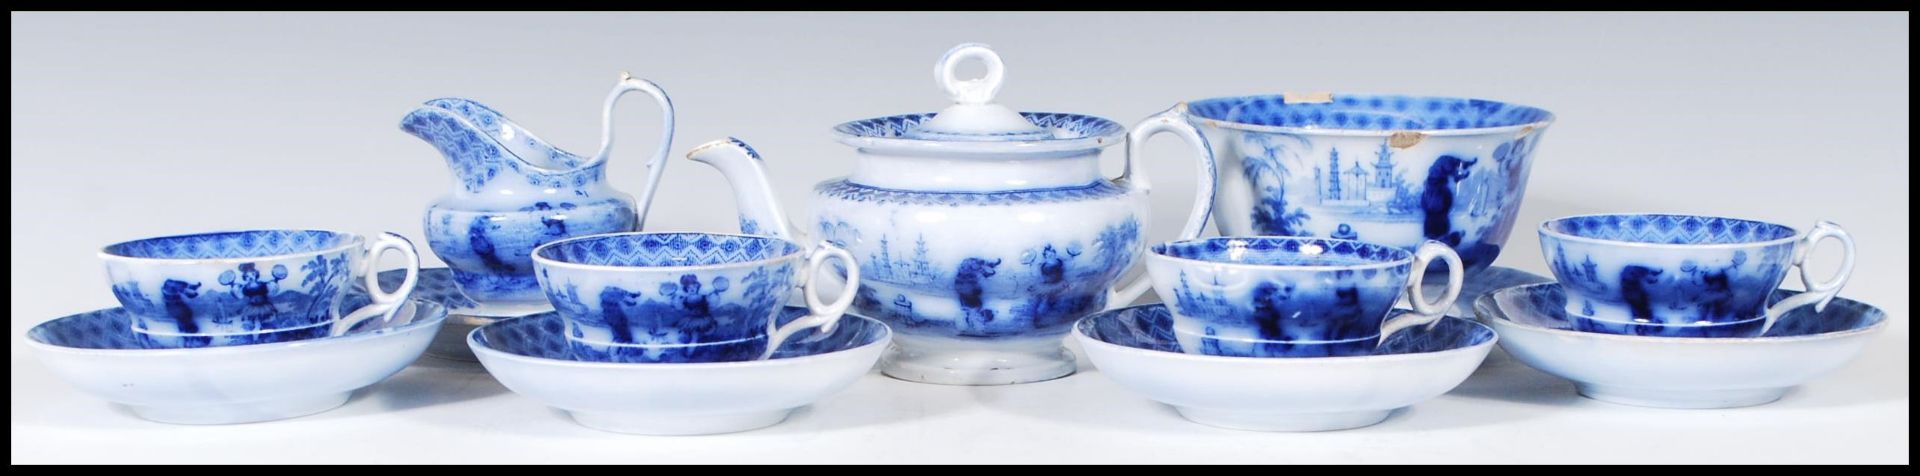 An early 19th Century flow blue / blue and white miniature child's tea service depicting Chinese